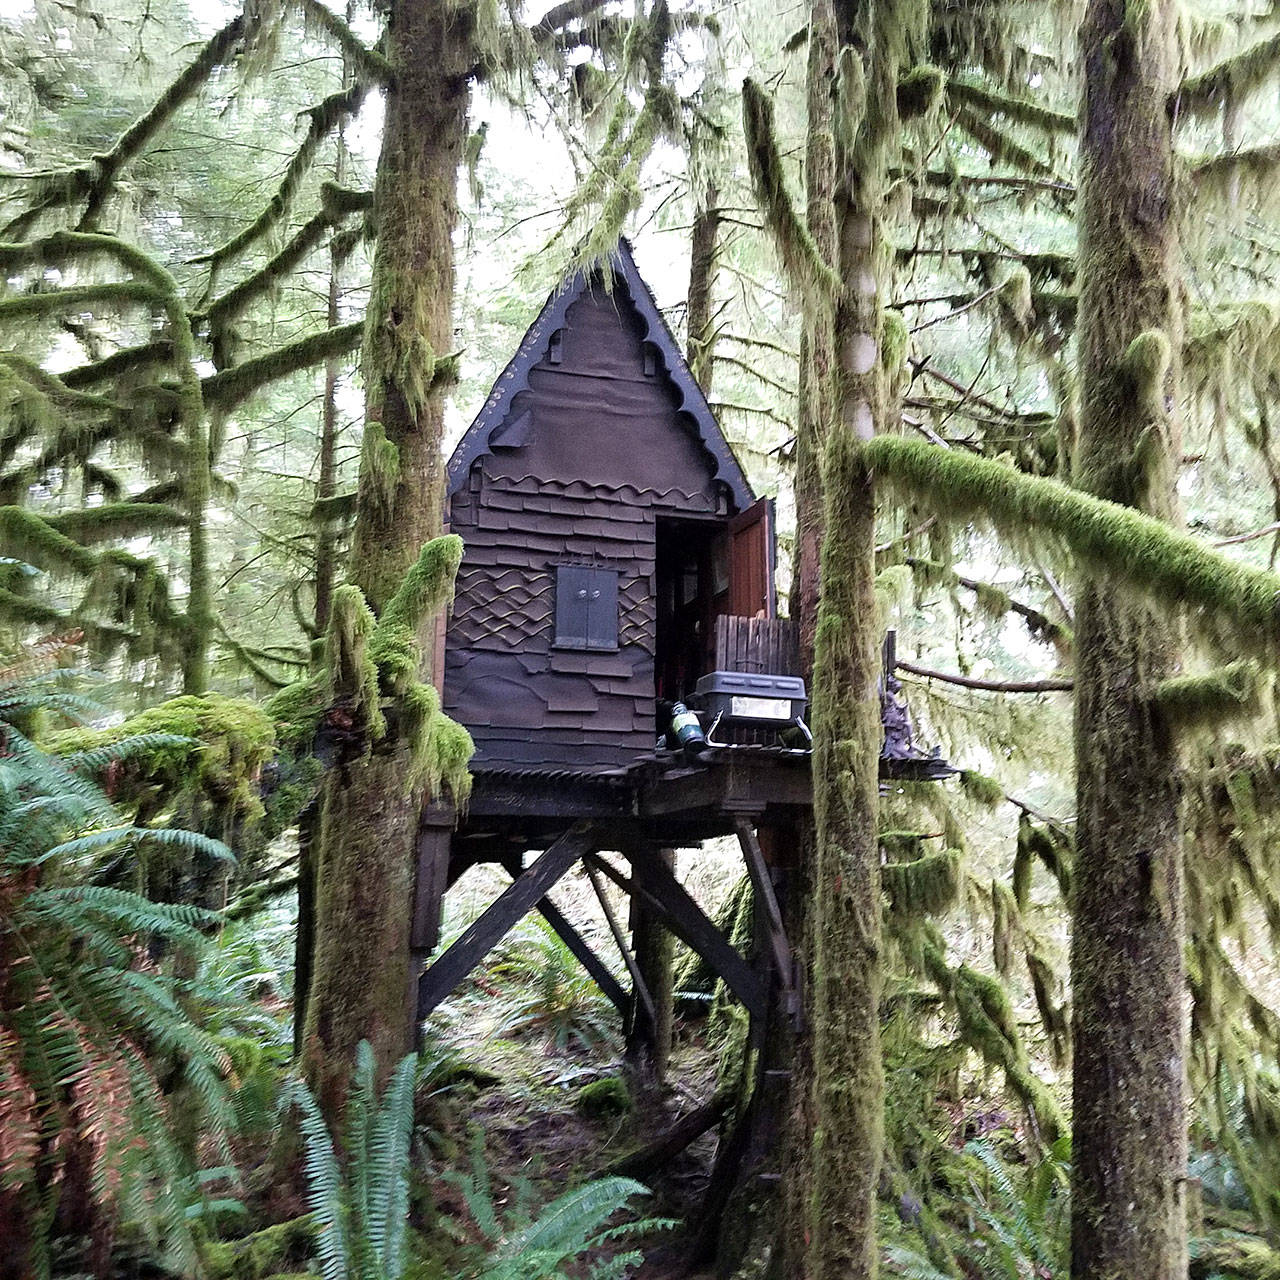 The cabin is located 8 miles up Southeast Middle Fork Road and is known within the hiking community. Photo courtesy of King County Sheriff’s Office